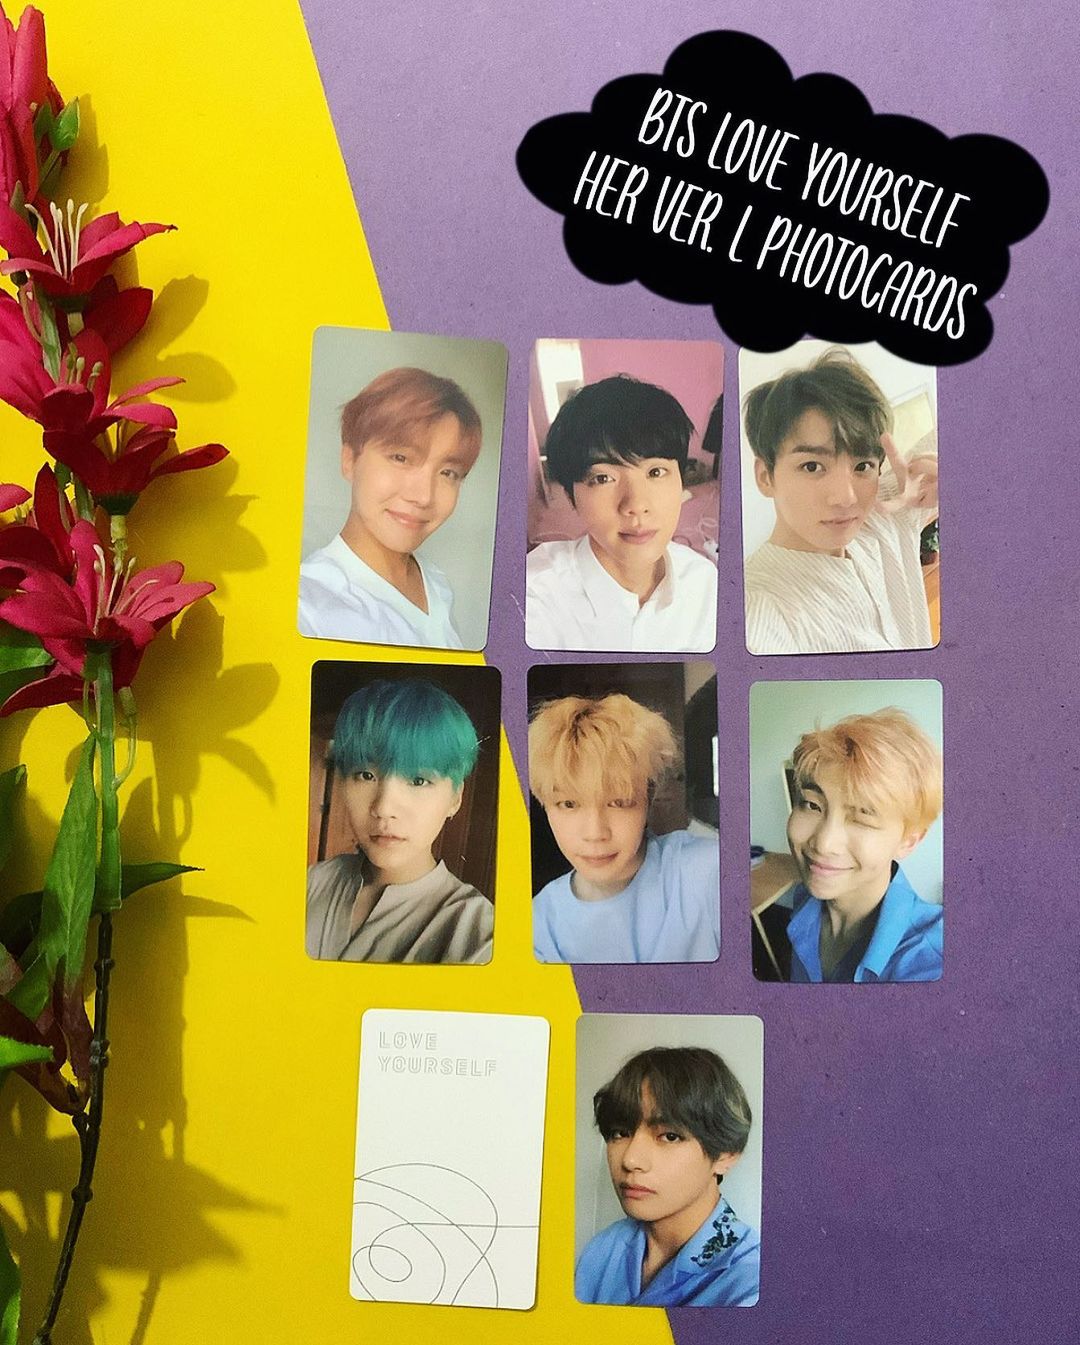 Love Yourself Her Ver. L Photocards (7 pcs)